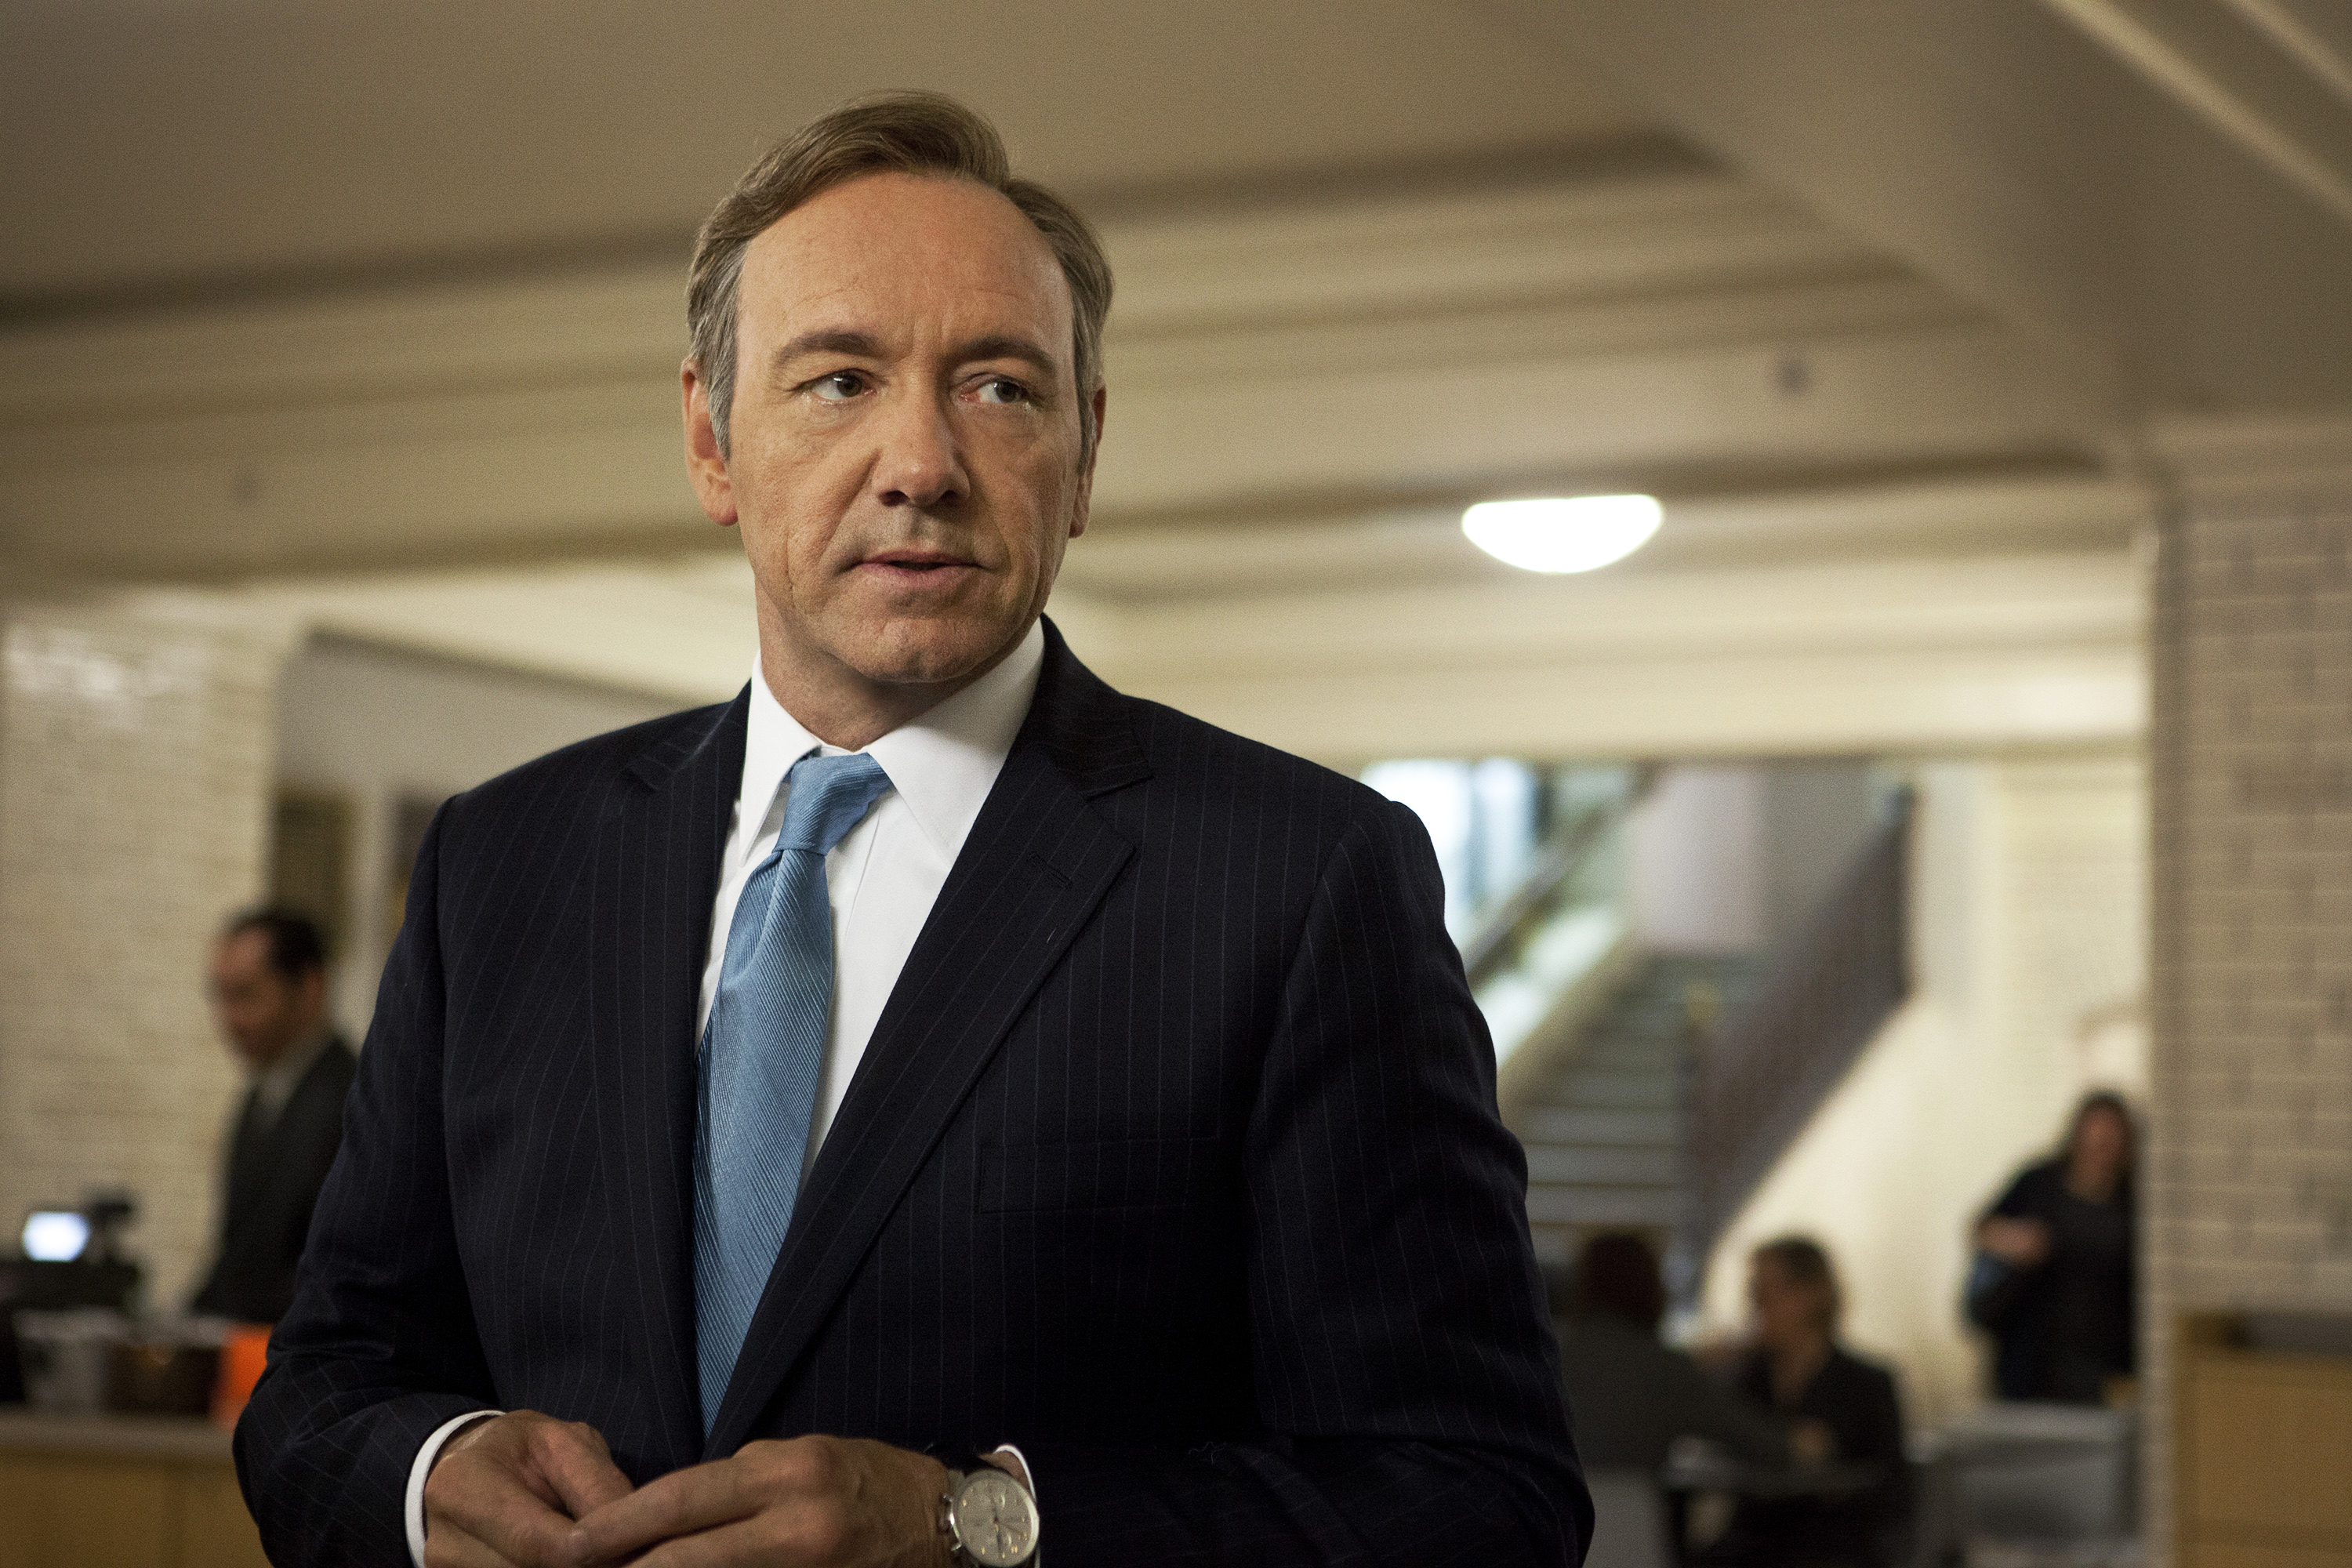 Kevin Spacey as U.S. Congressman Frank Underwood in a scene from the first season of the Netflix original series, "House of Cards."